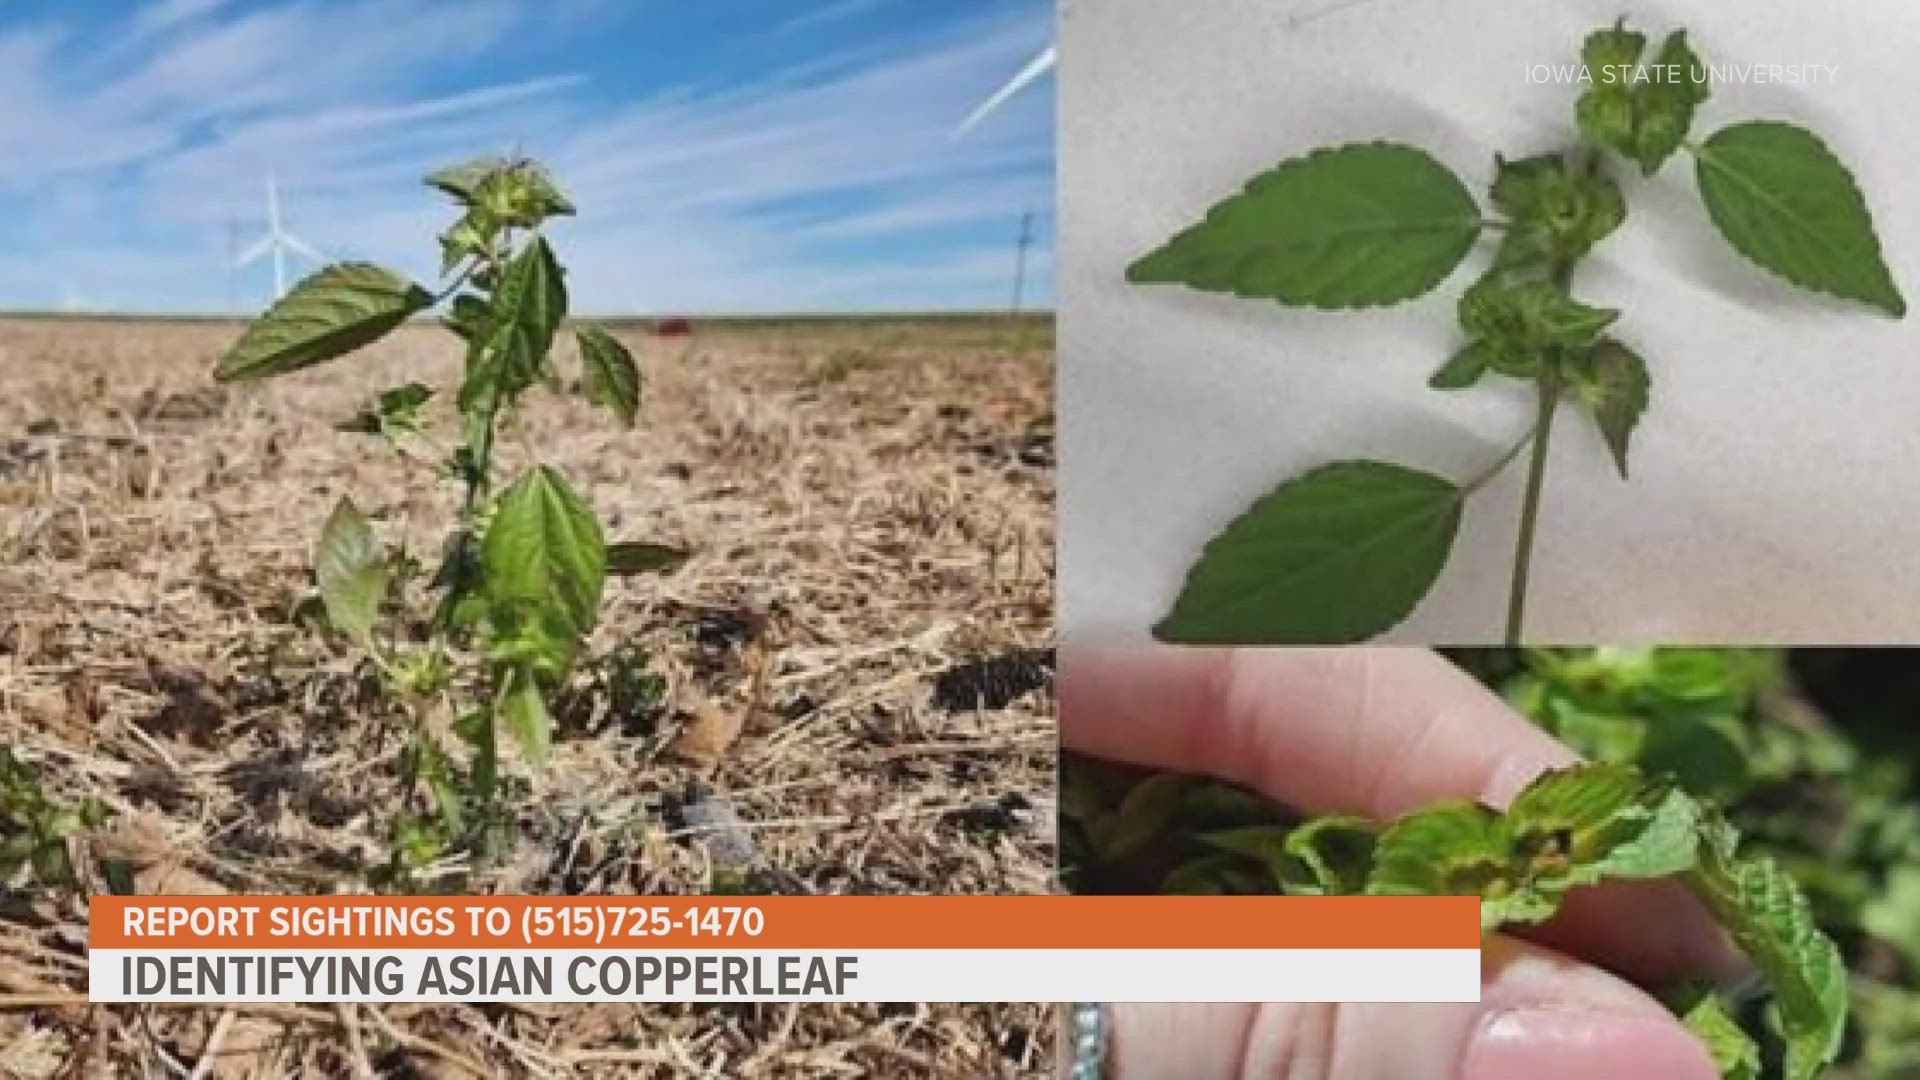 Asian copperleaf is considered a threat to row crops, including corn and soybeans.